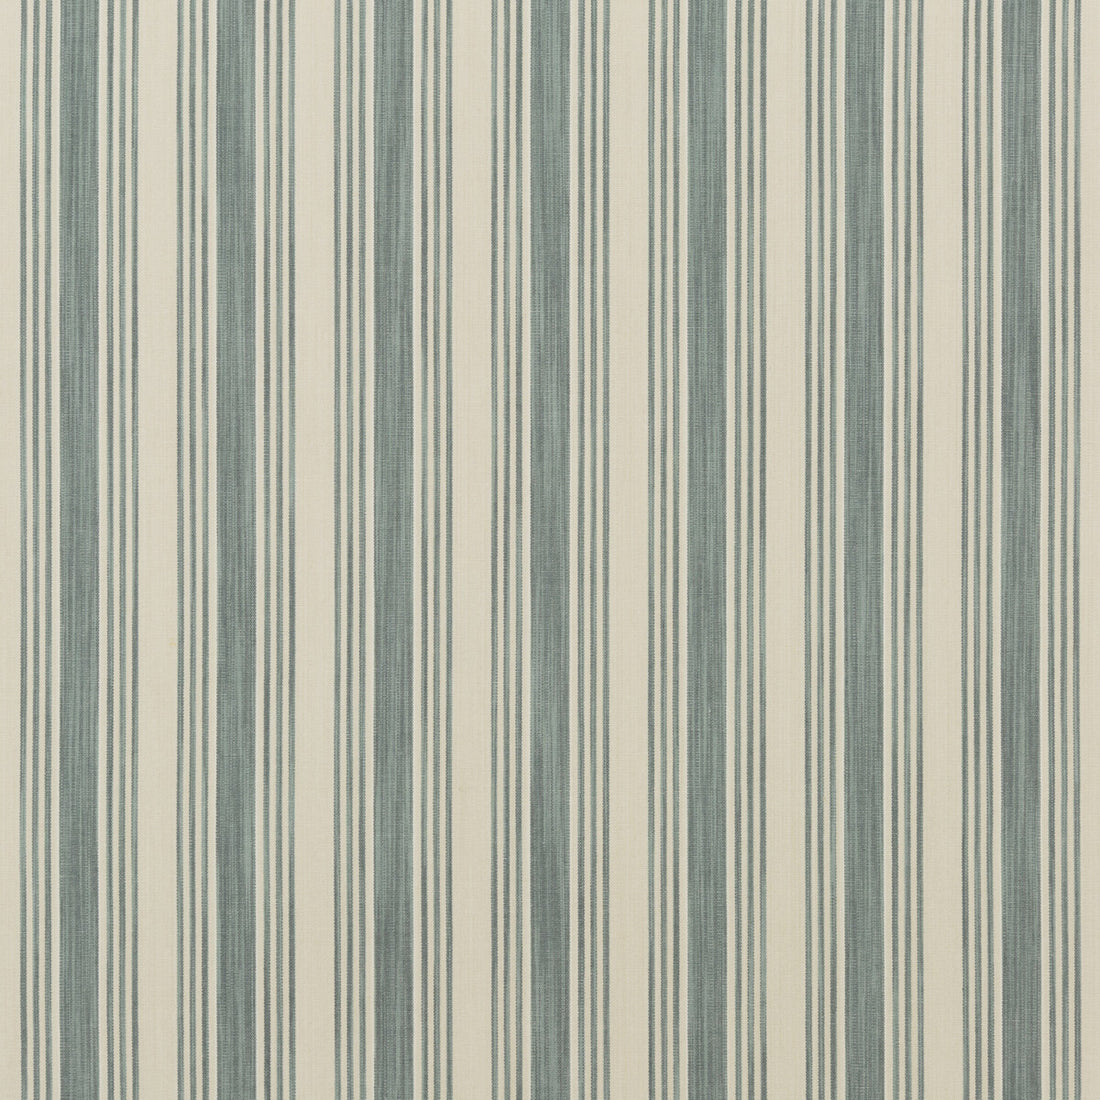 Hammock Stripe fabric in teal color - pattern FD759.R11.0 - by Mulberry in the Festival collection